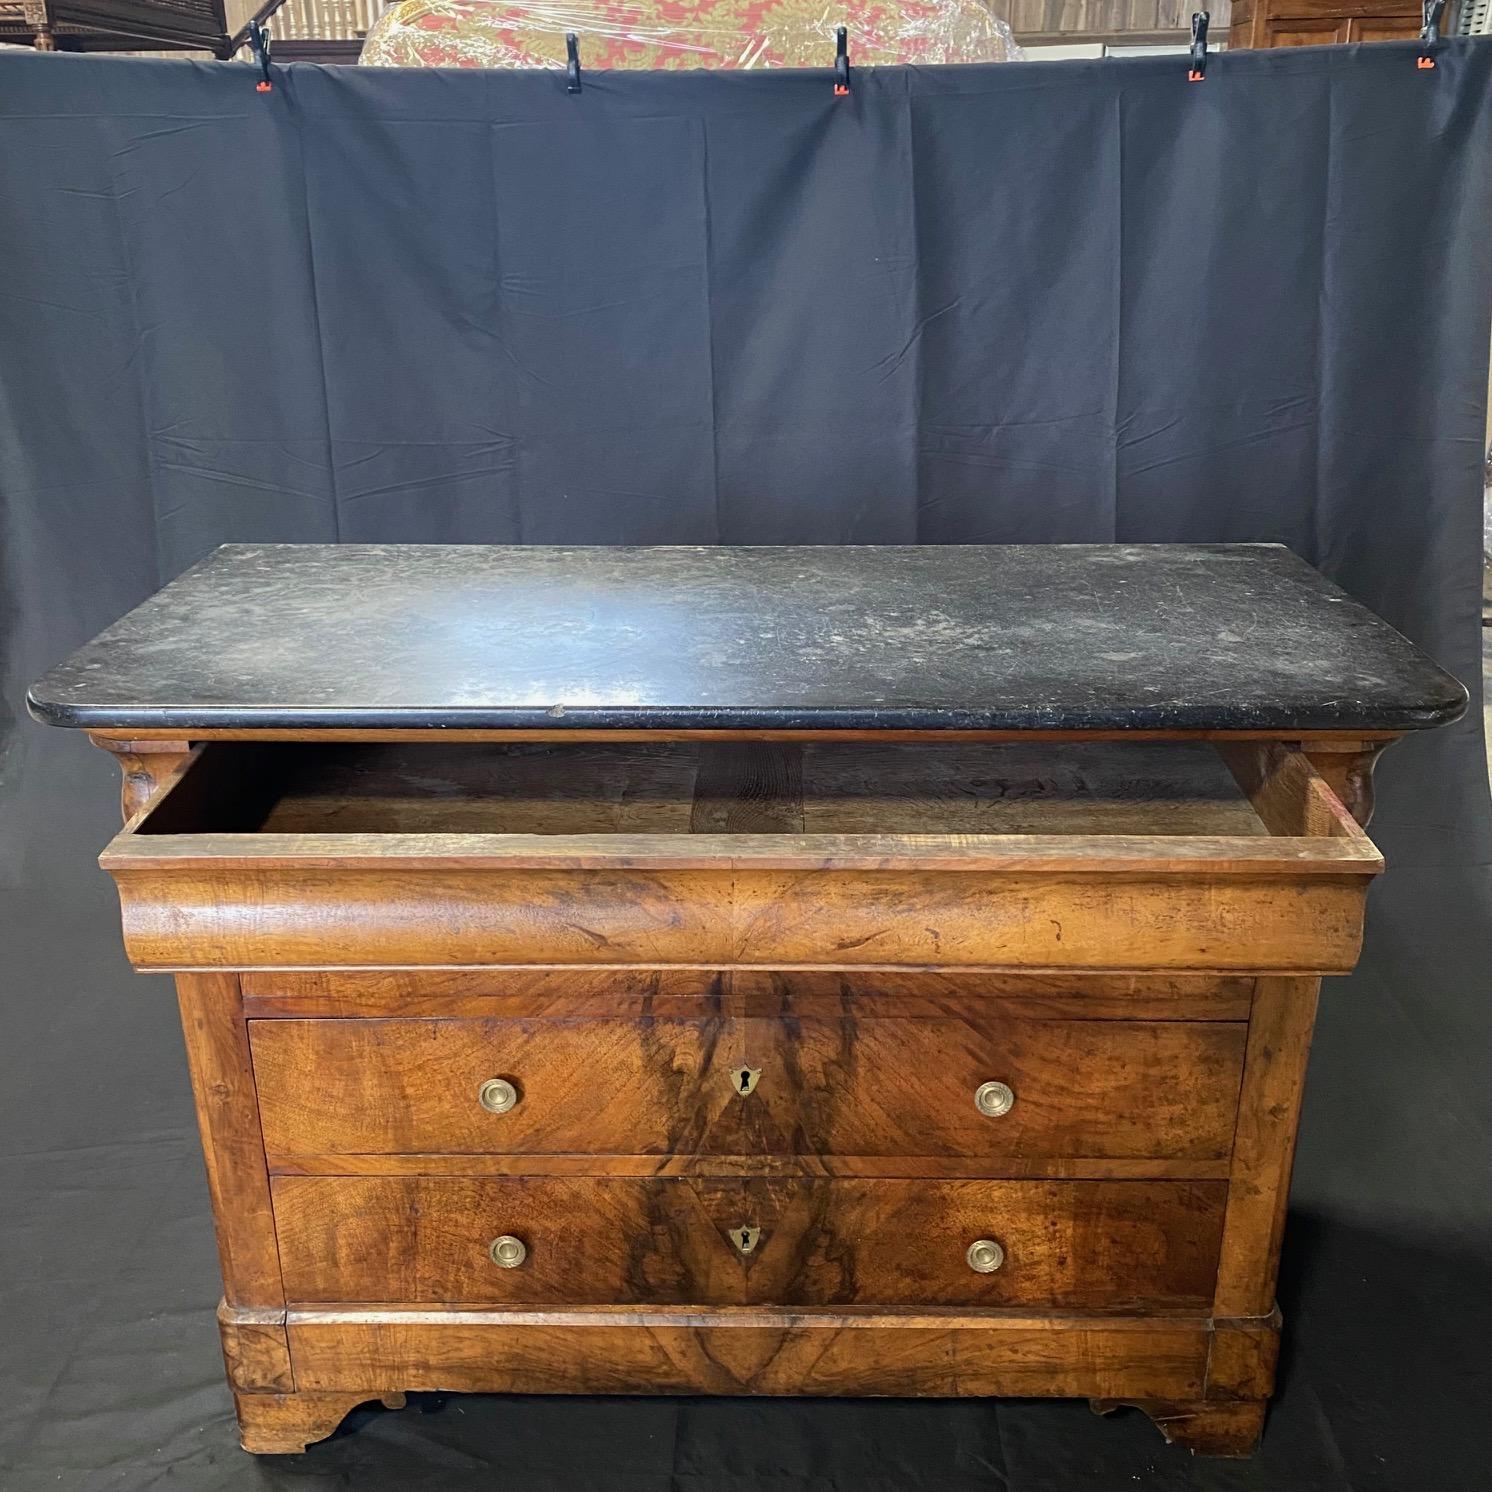 A French Neoclassical commode, with marble top and exquisite brass accent knobs, from the 19th century. This antique chest from France features a rectangular-shaped gray marble top, over case which houses four drawers (upper drawer is disguised